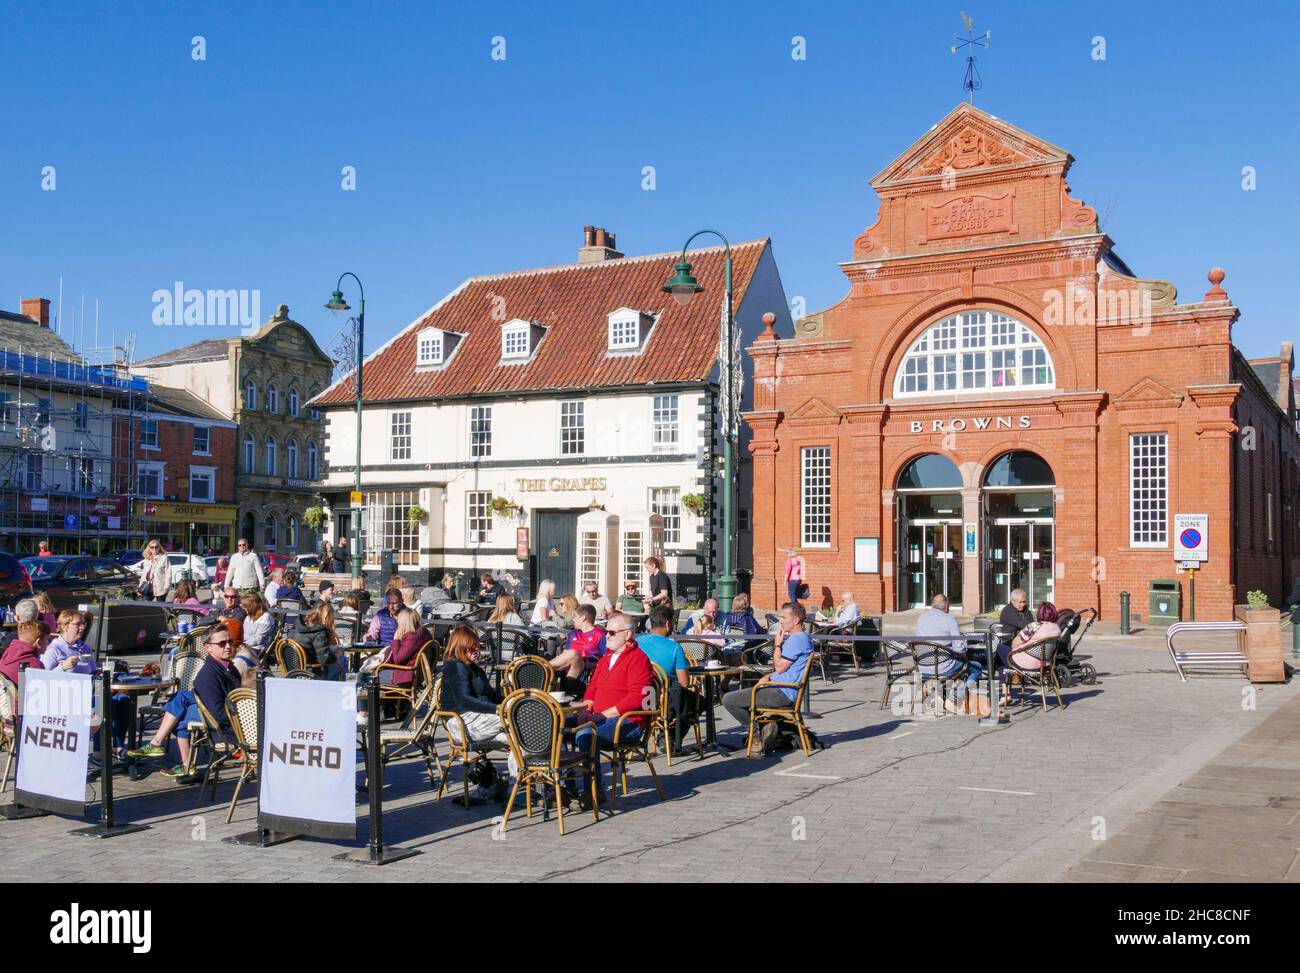 Browns Beverley a department store and Caffe Nero outdoor cafe in the Market town of Beverley Yorkshire East Riding of Yorkshire England UK GB Europe Stock Photo